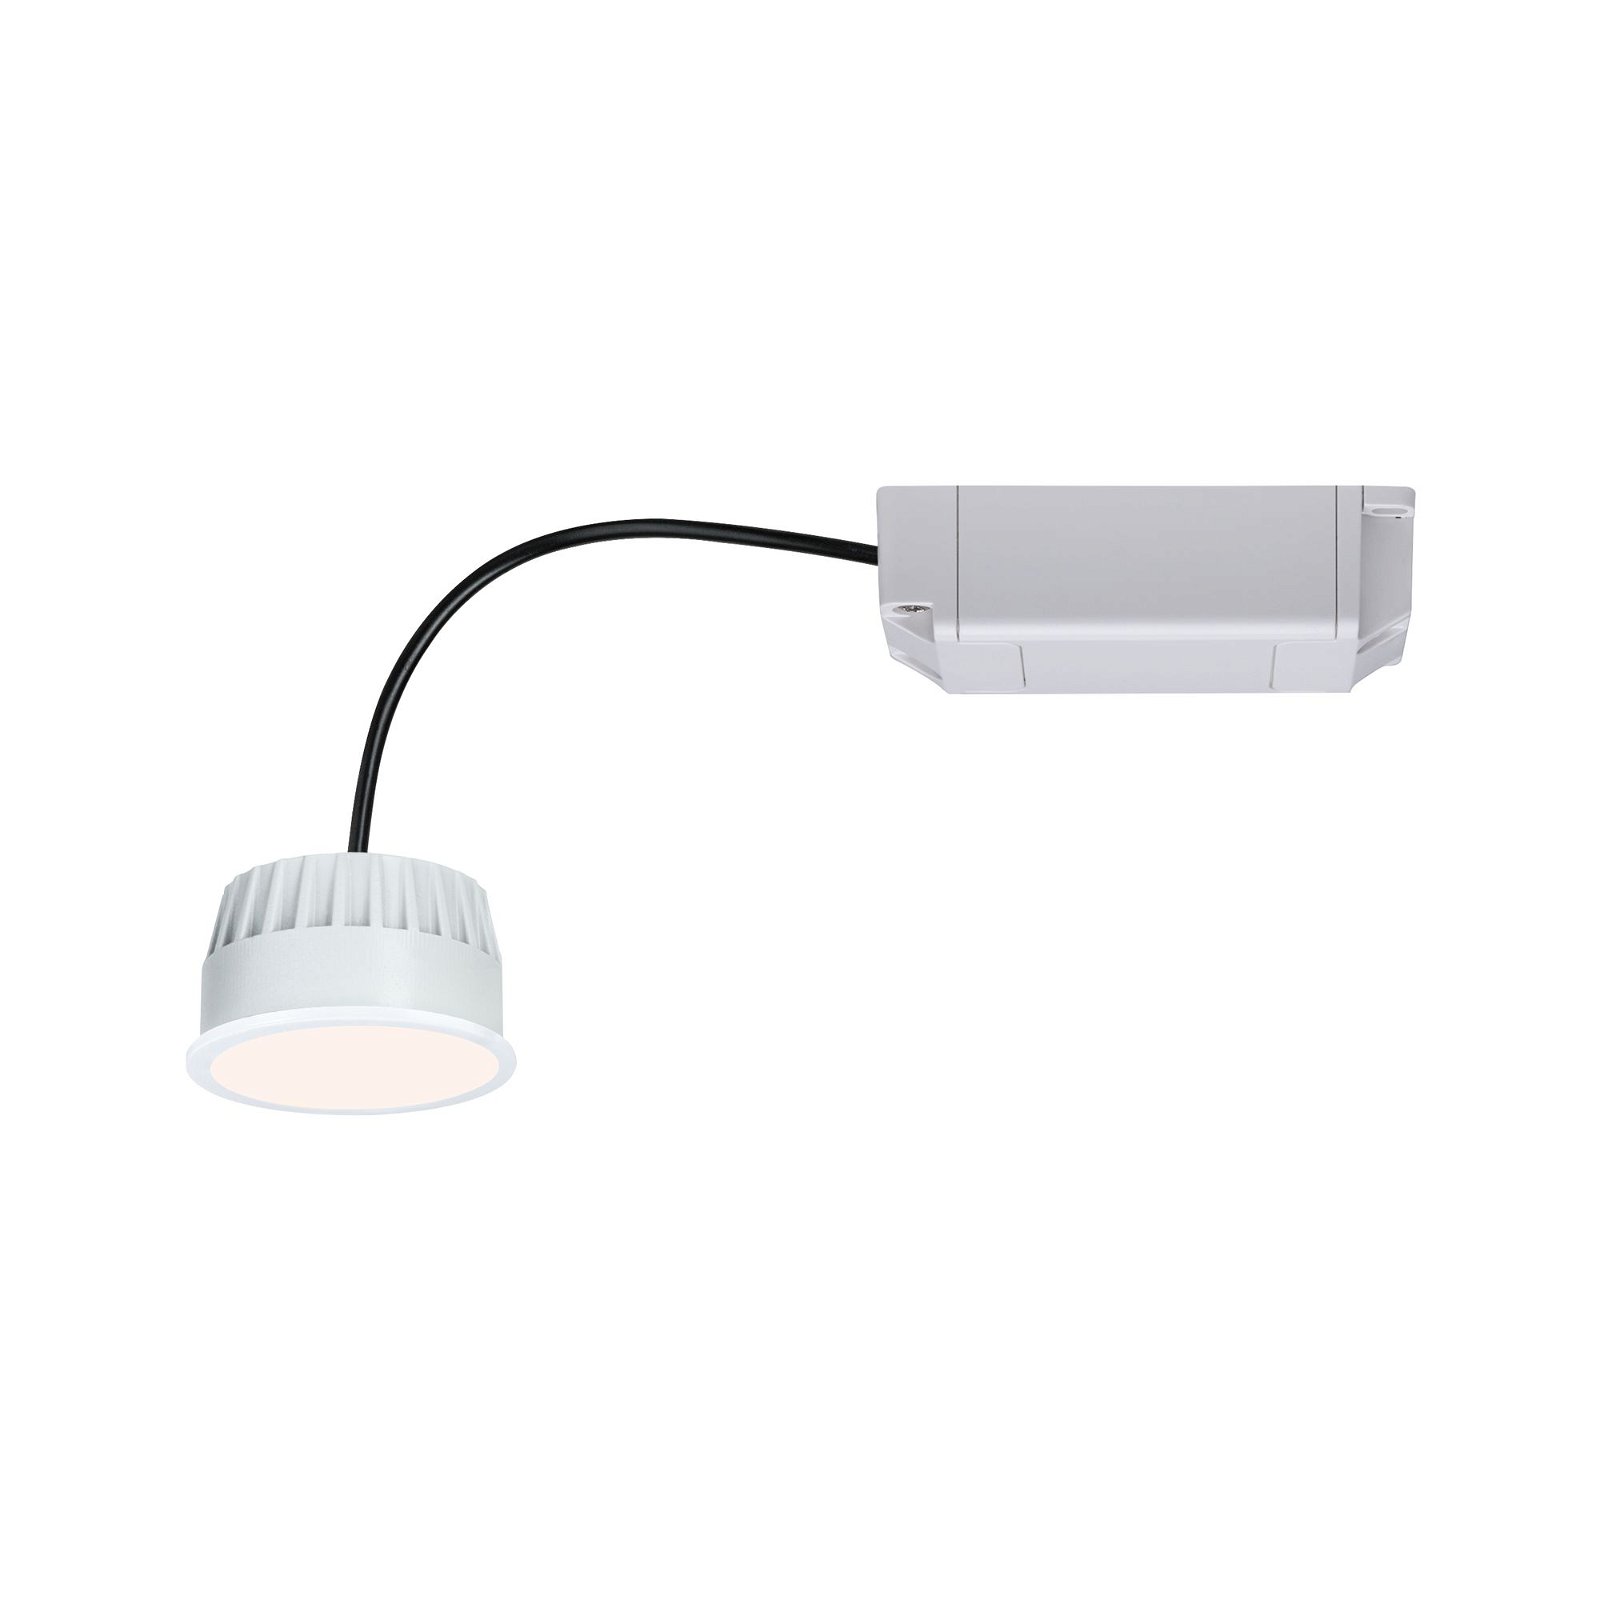 LED Module recessed luminaire Smart Home Zigbee Warm white Coin round 50mm Coin 6W 460lm 230V dimmable 2700K Opal